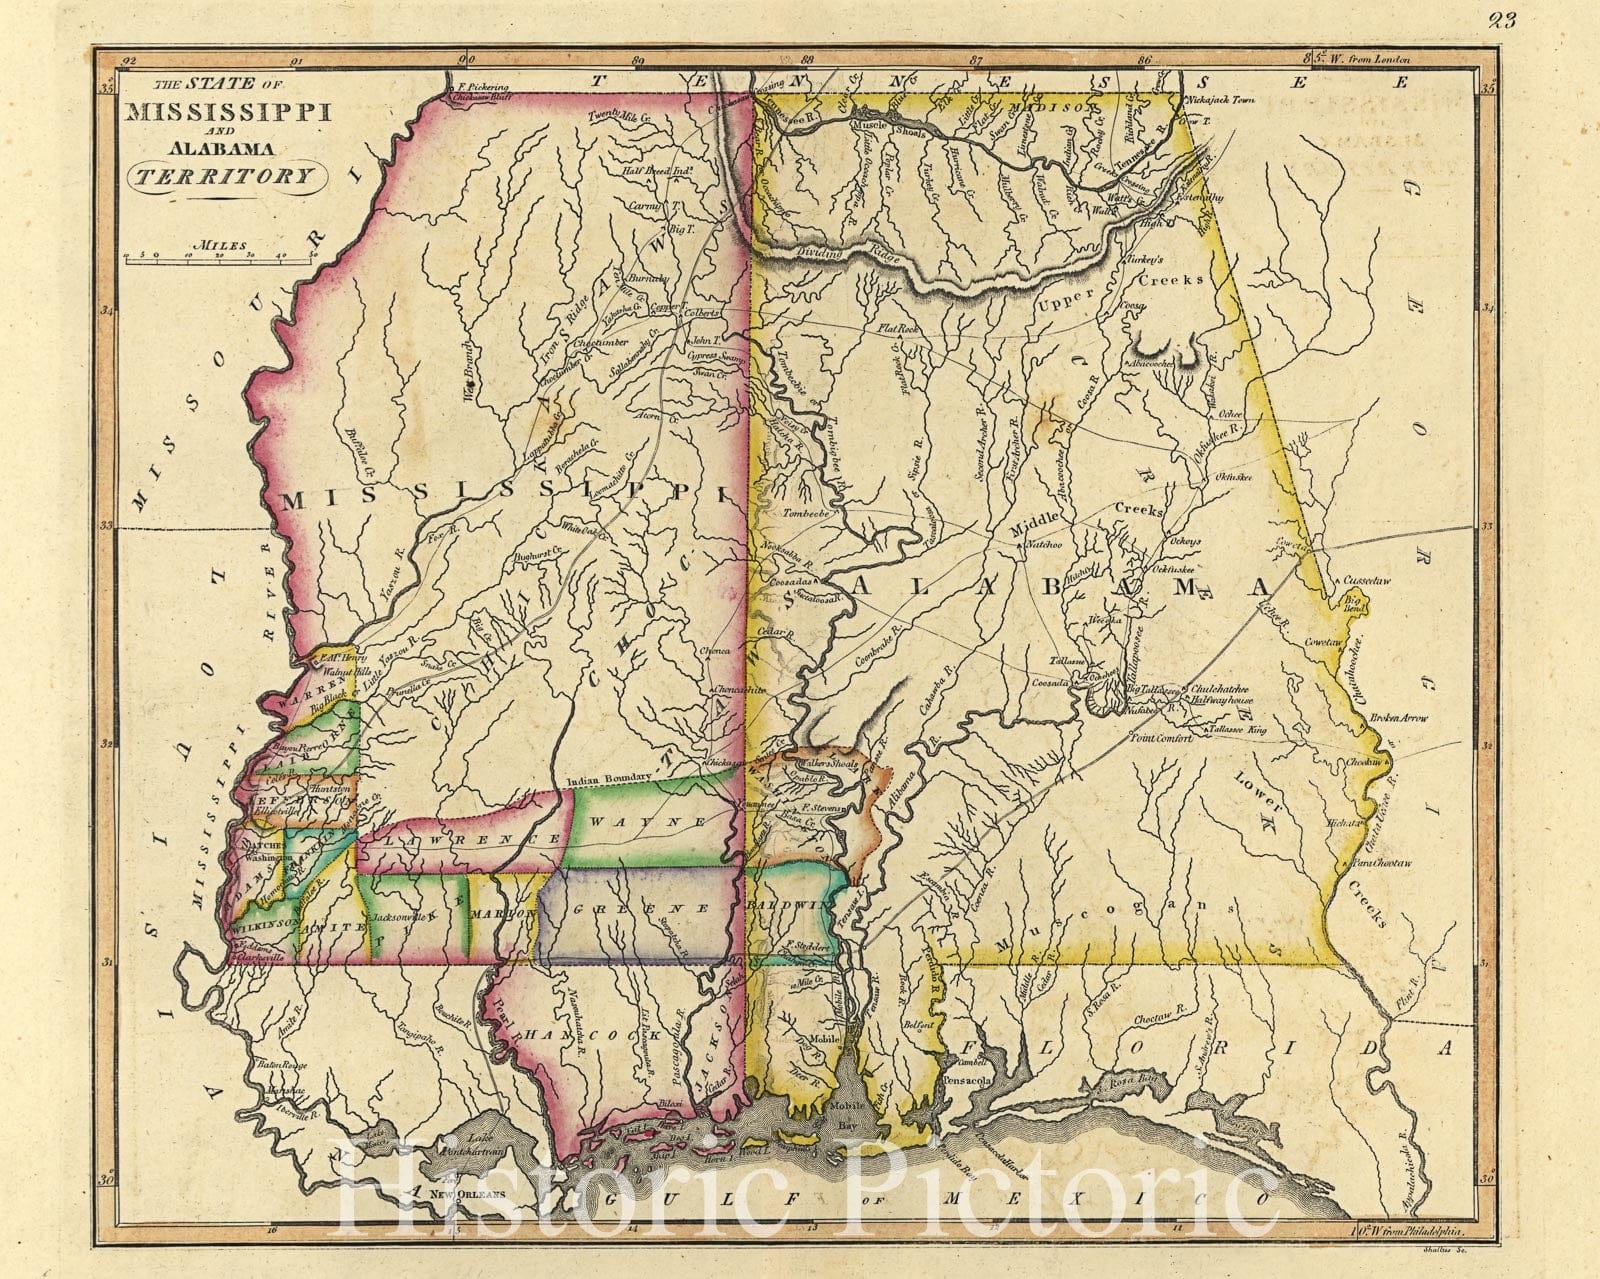 Historic 1810 Map - The State of Mississippi and Alabama Territory.